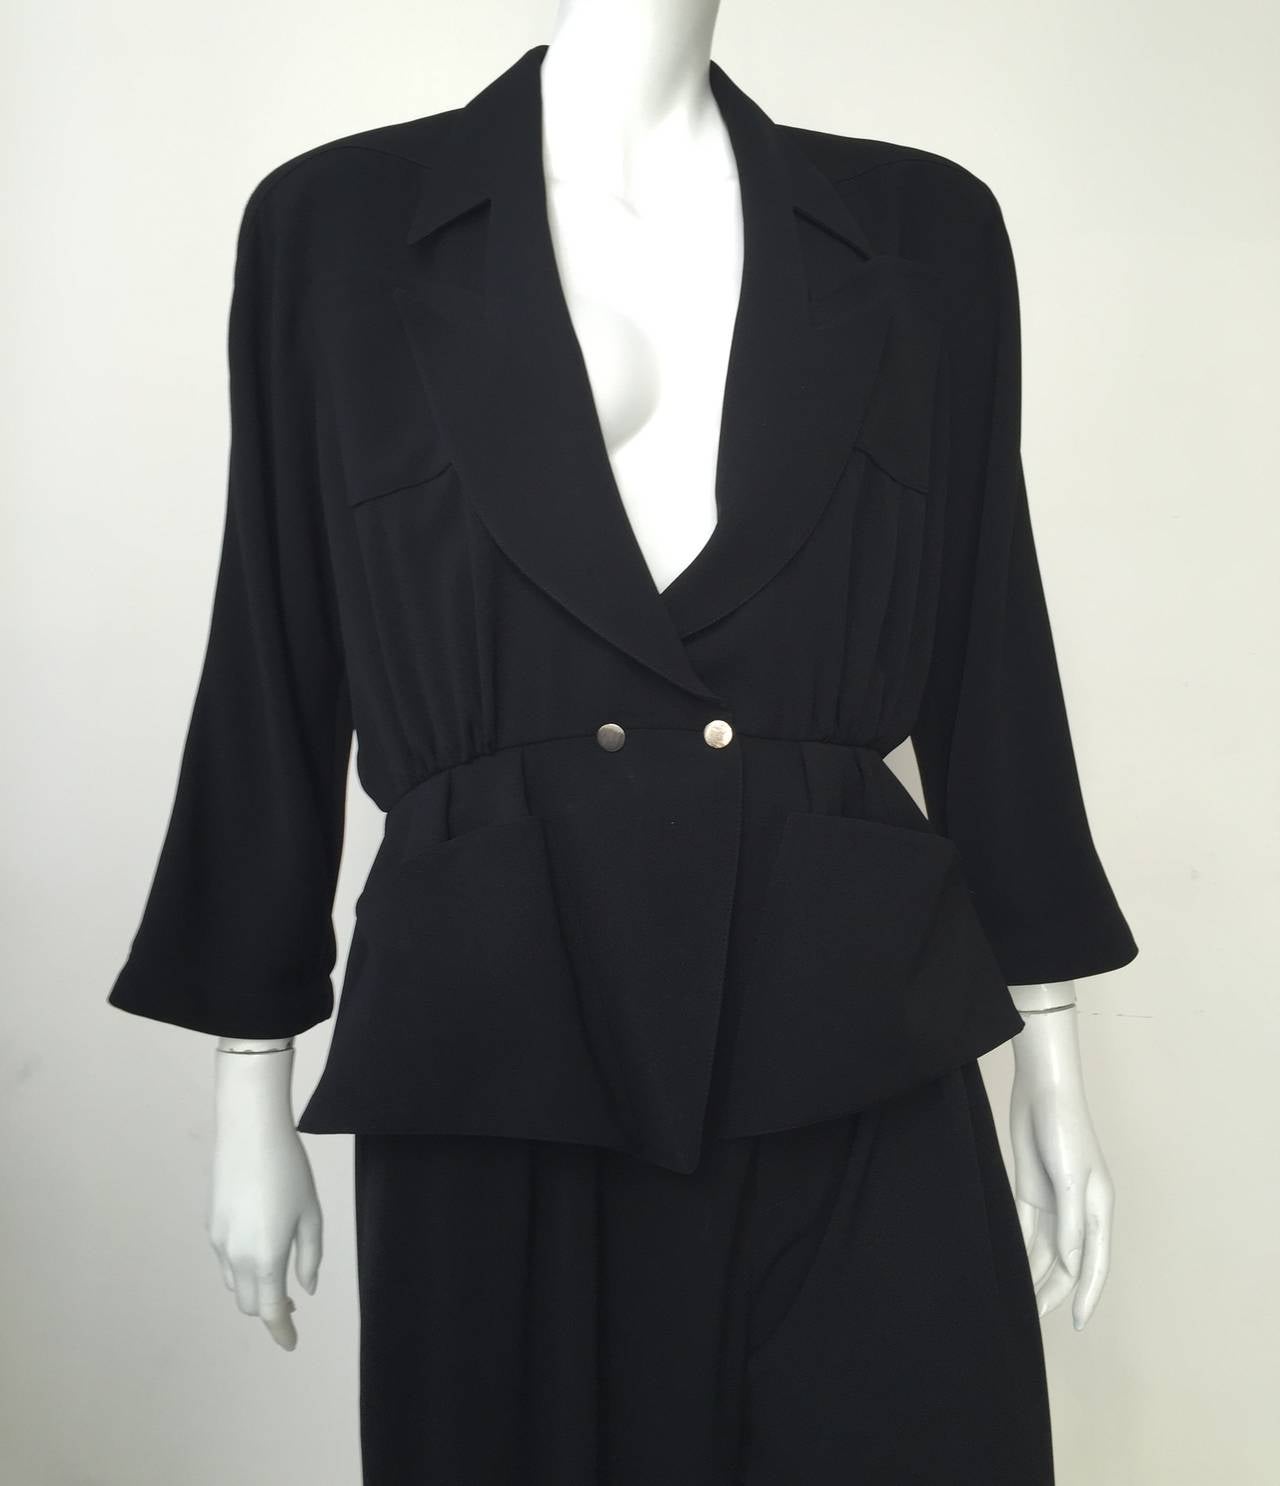 Thierry Mugler 80s black pant suit made in France. French size 44 which is a US size 12 but fits more like a today size 8/10 - please use measurements to measure yourself to make sure this fits properly.  
Measurements are:
JACKET:
42